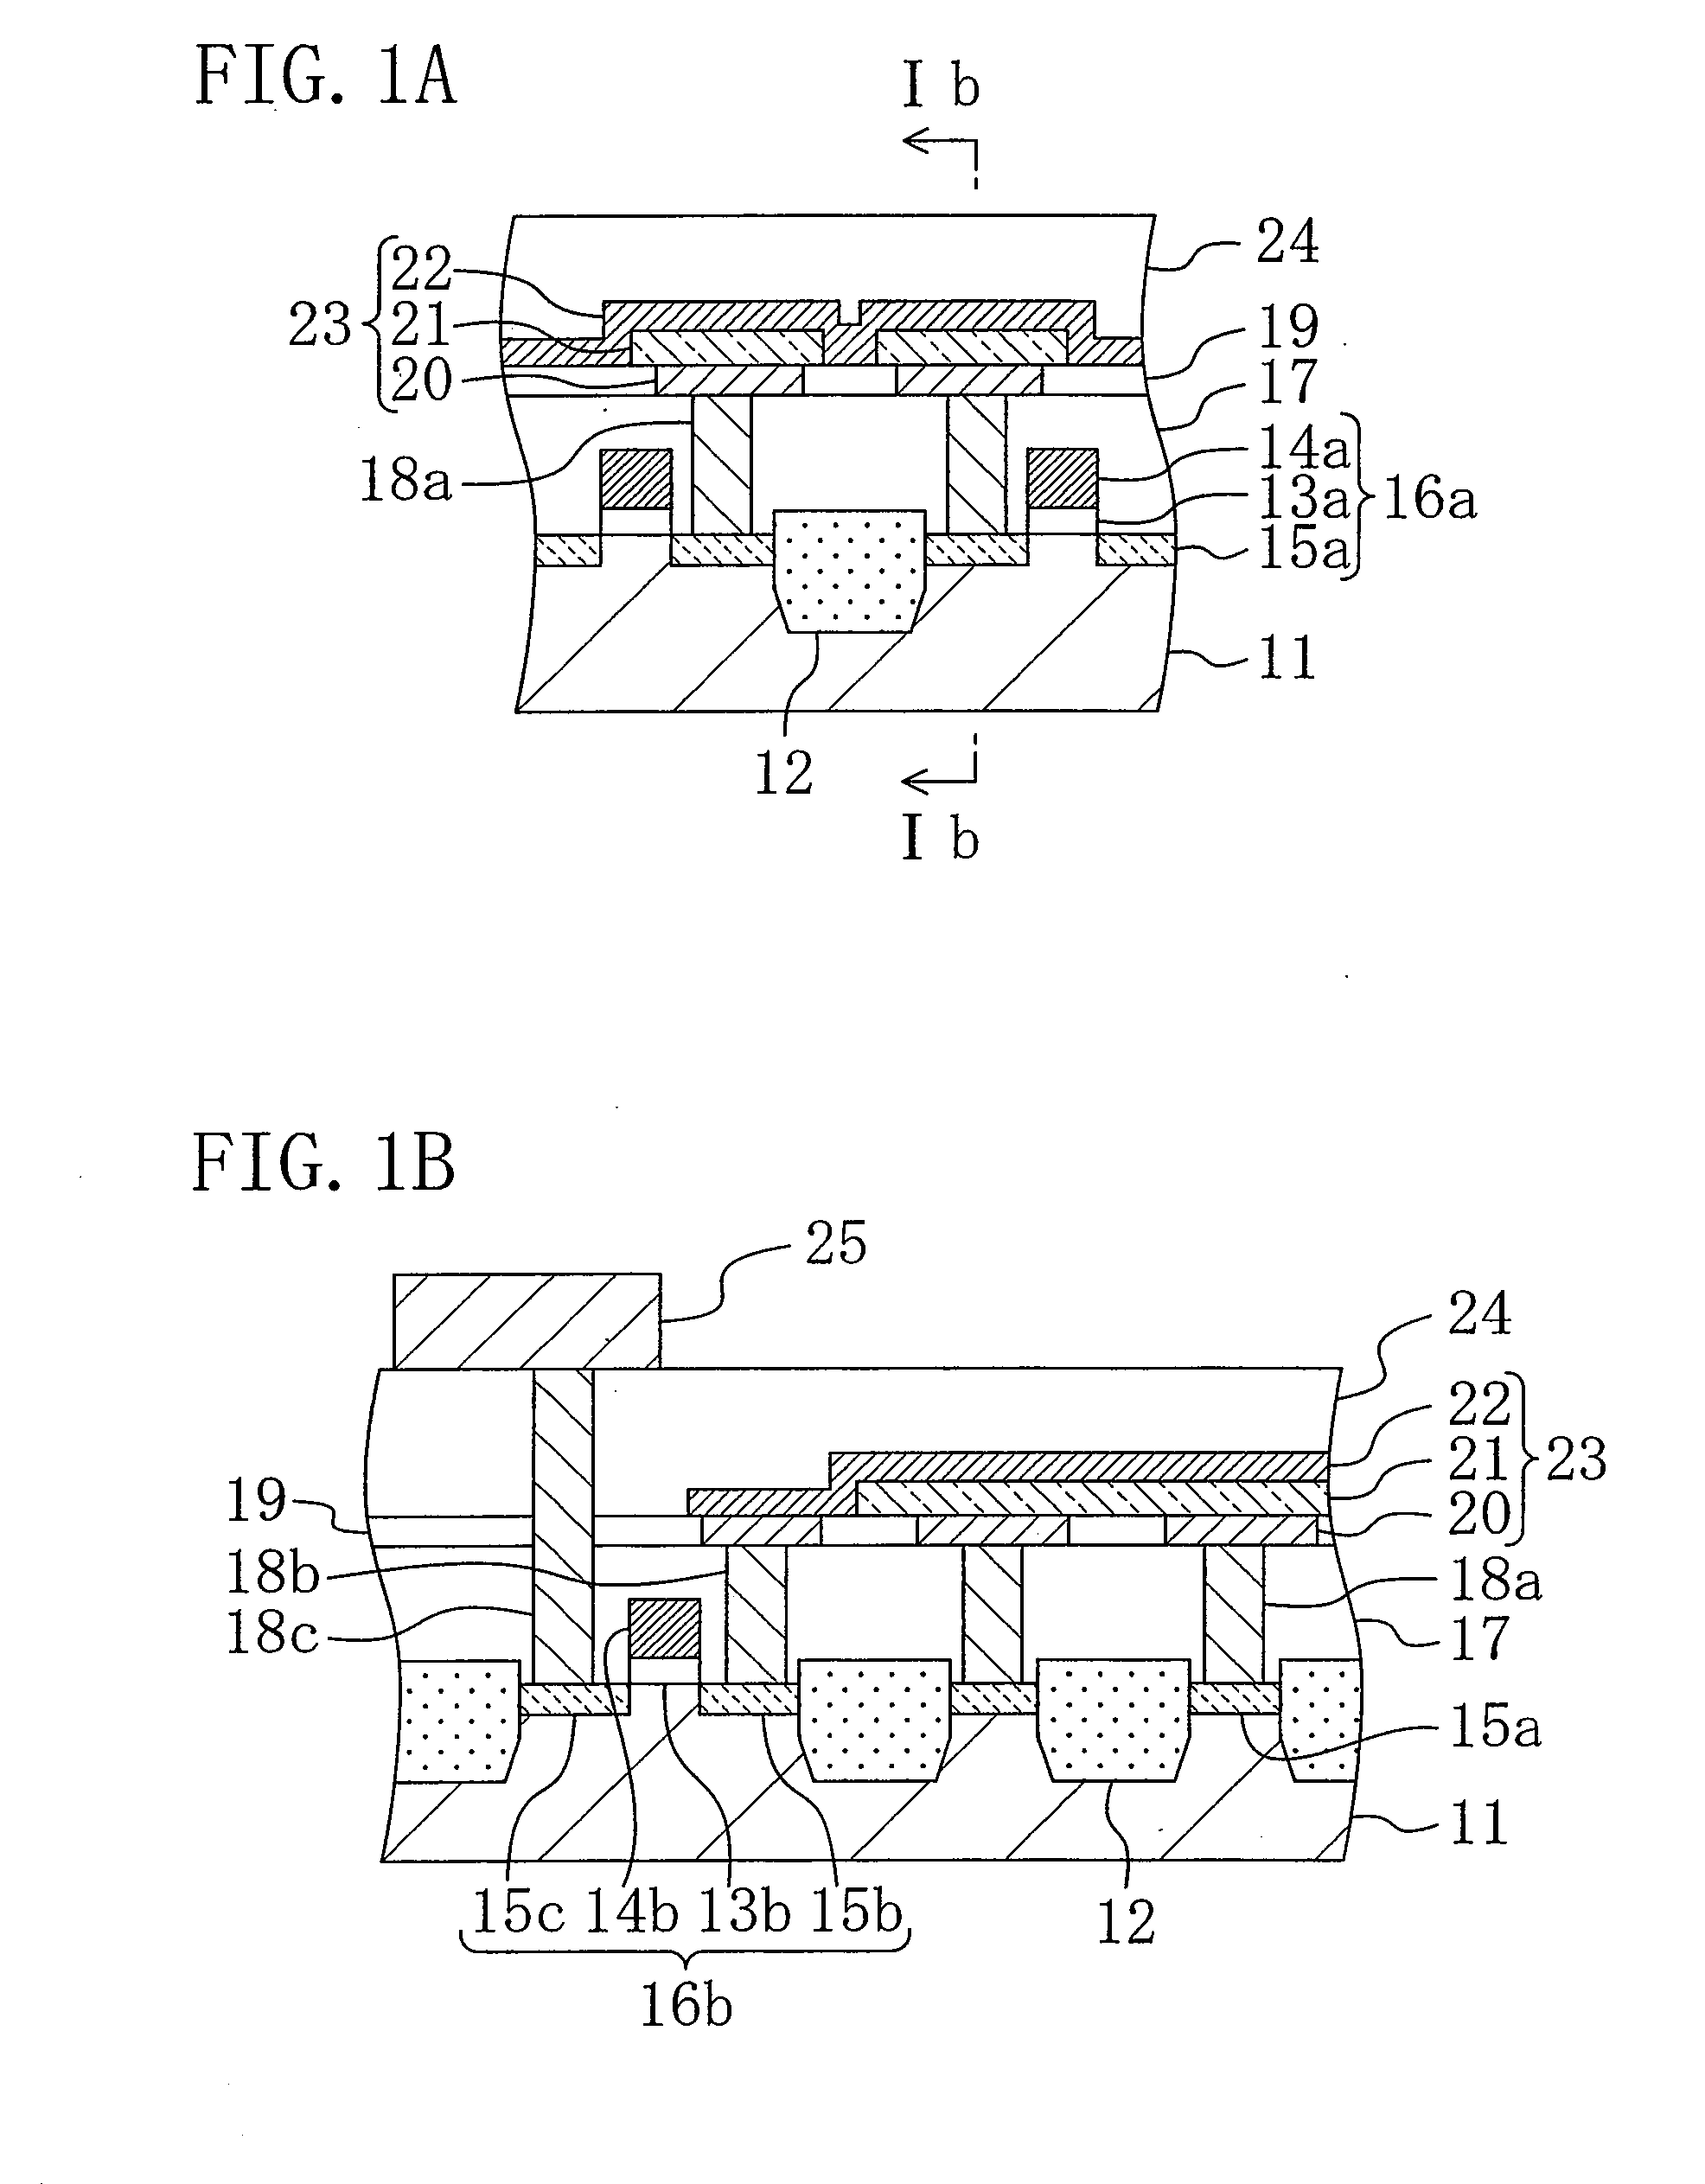 Capacitor insulating film, method for fabricating the same, capacitor element, method for fabricating the same, semiconductor memory device, and method for fabricating the same